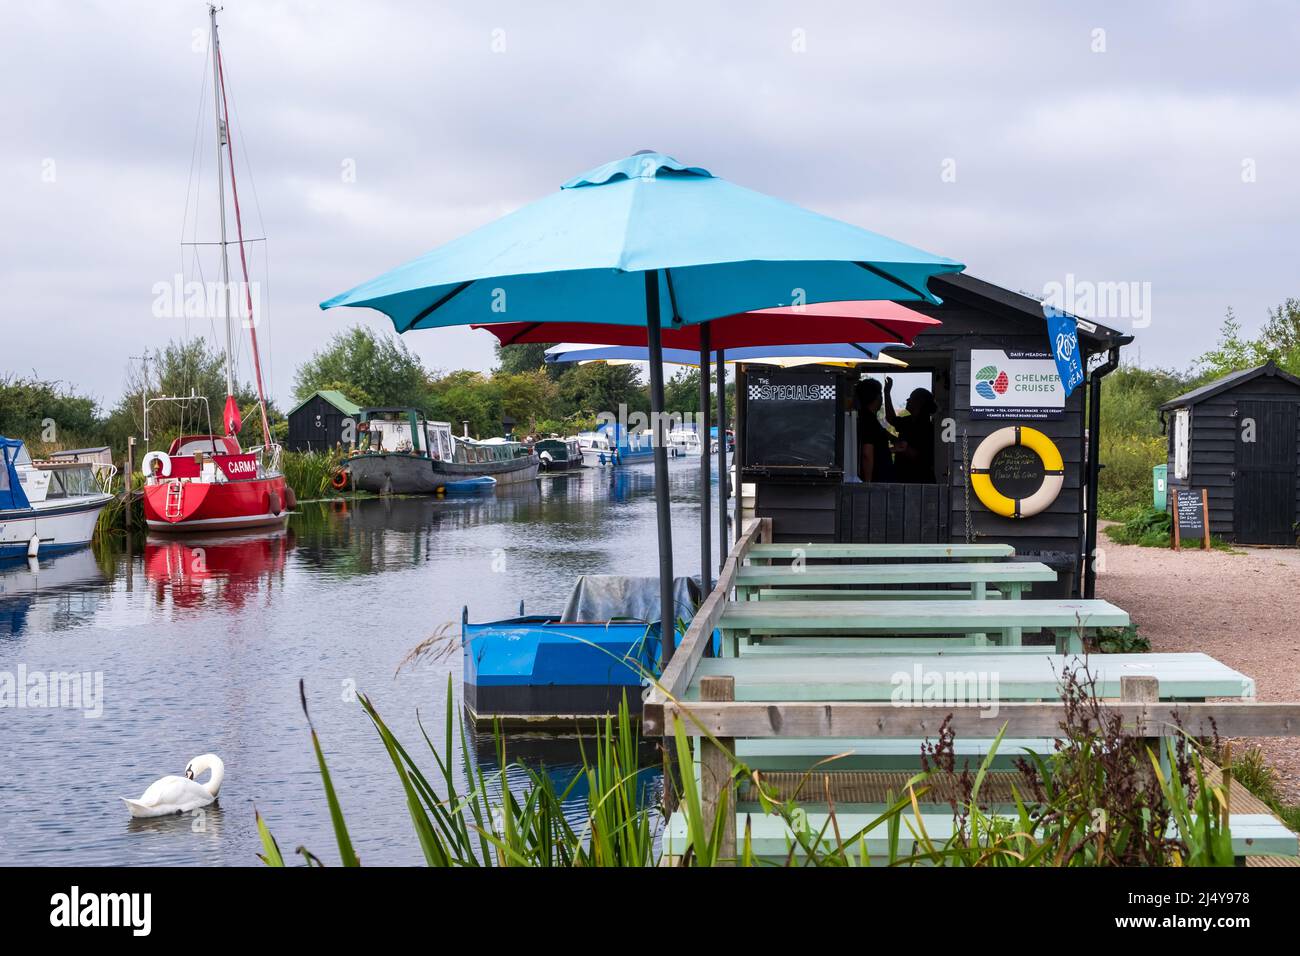 Couple in silhouette inside a kiosk. One appears to reach for something. Colourful umbrellas line the canal side and a white swan swims up and down. Stock Photo